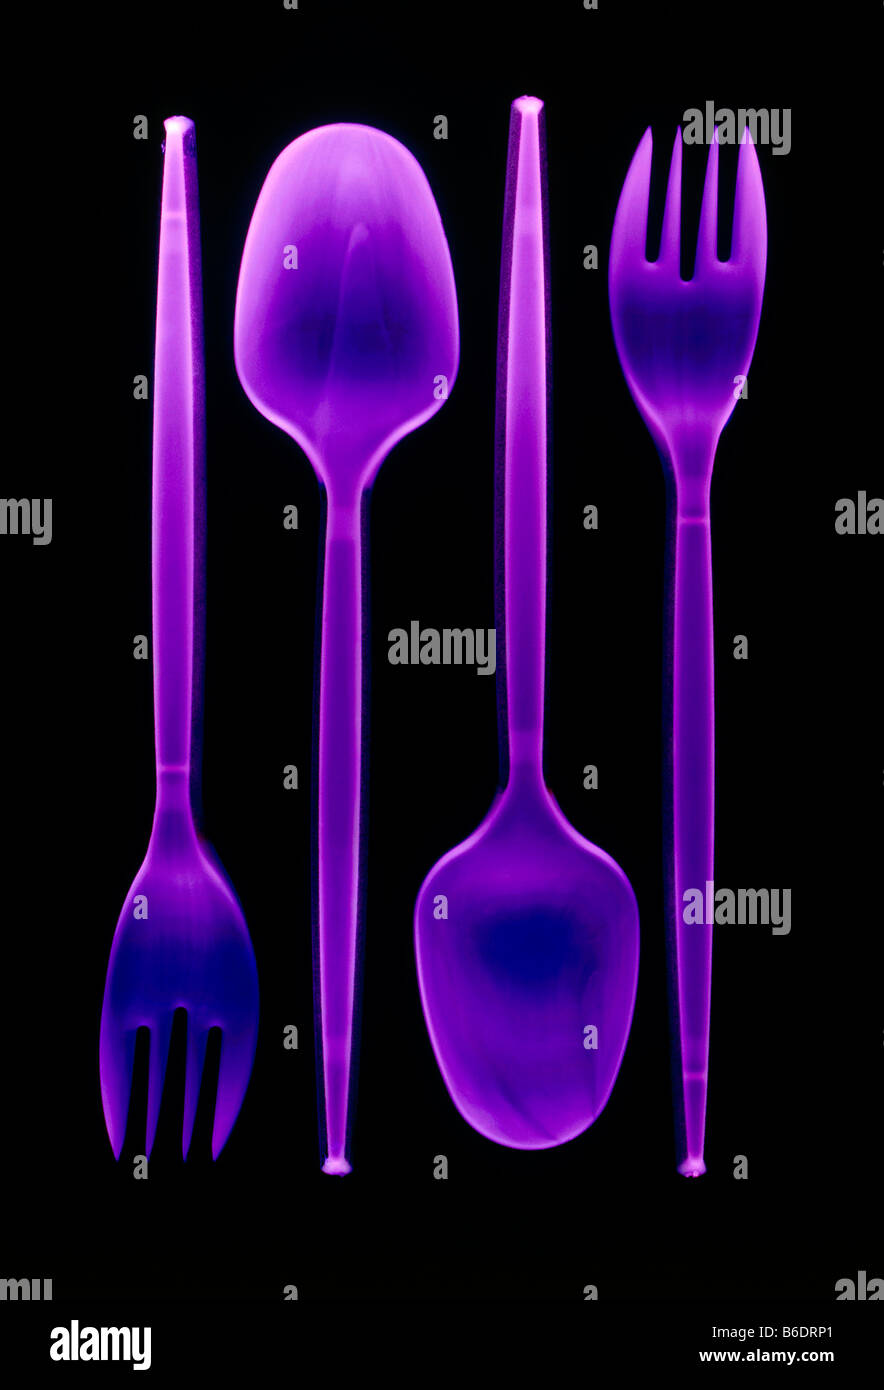 Plastic cutlery. Spoons and forks made of plastic. Stock Photo